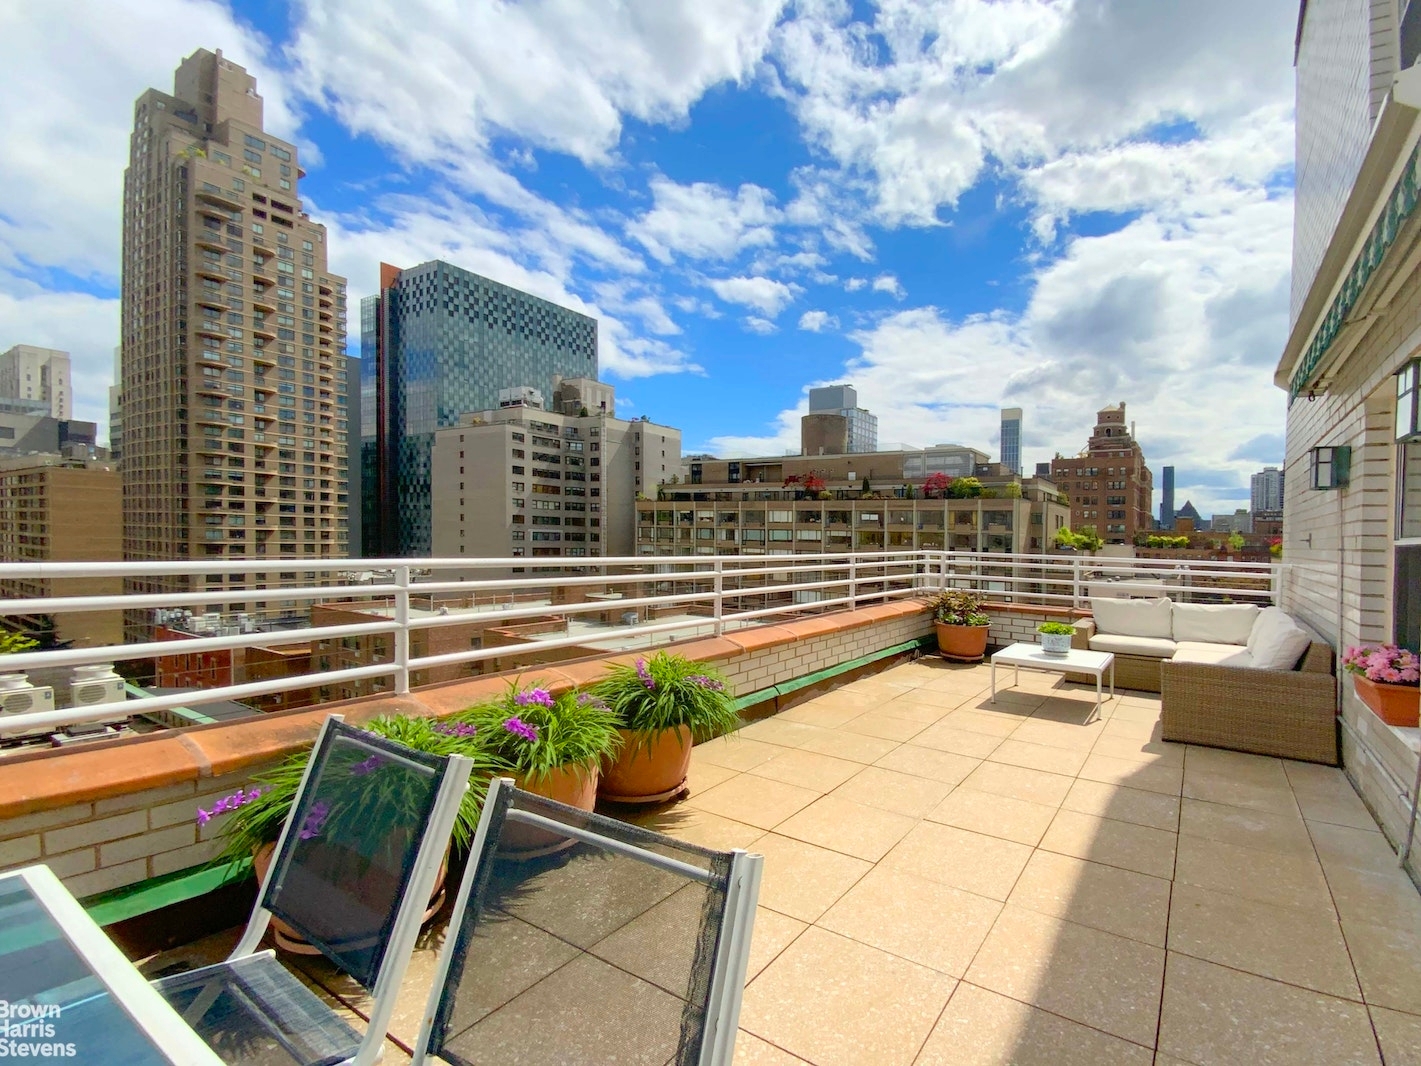 Co-op Properties for Sale at 315 E 70TH ST, 11P Lenox Hill, New York, New York 10021